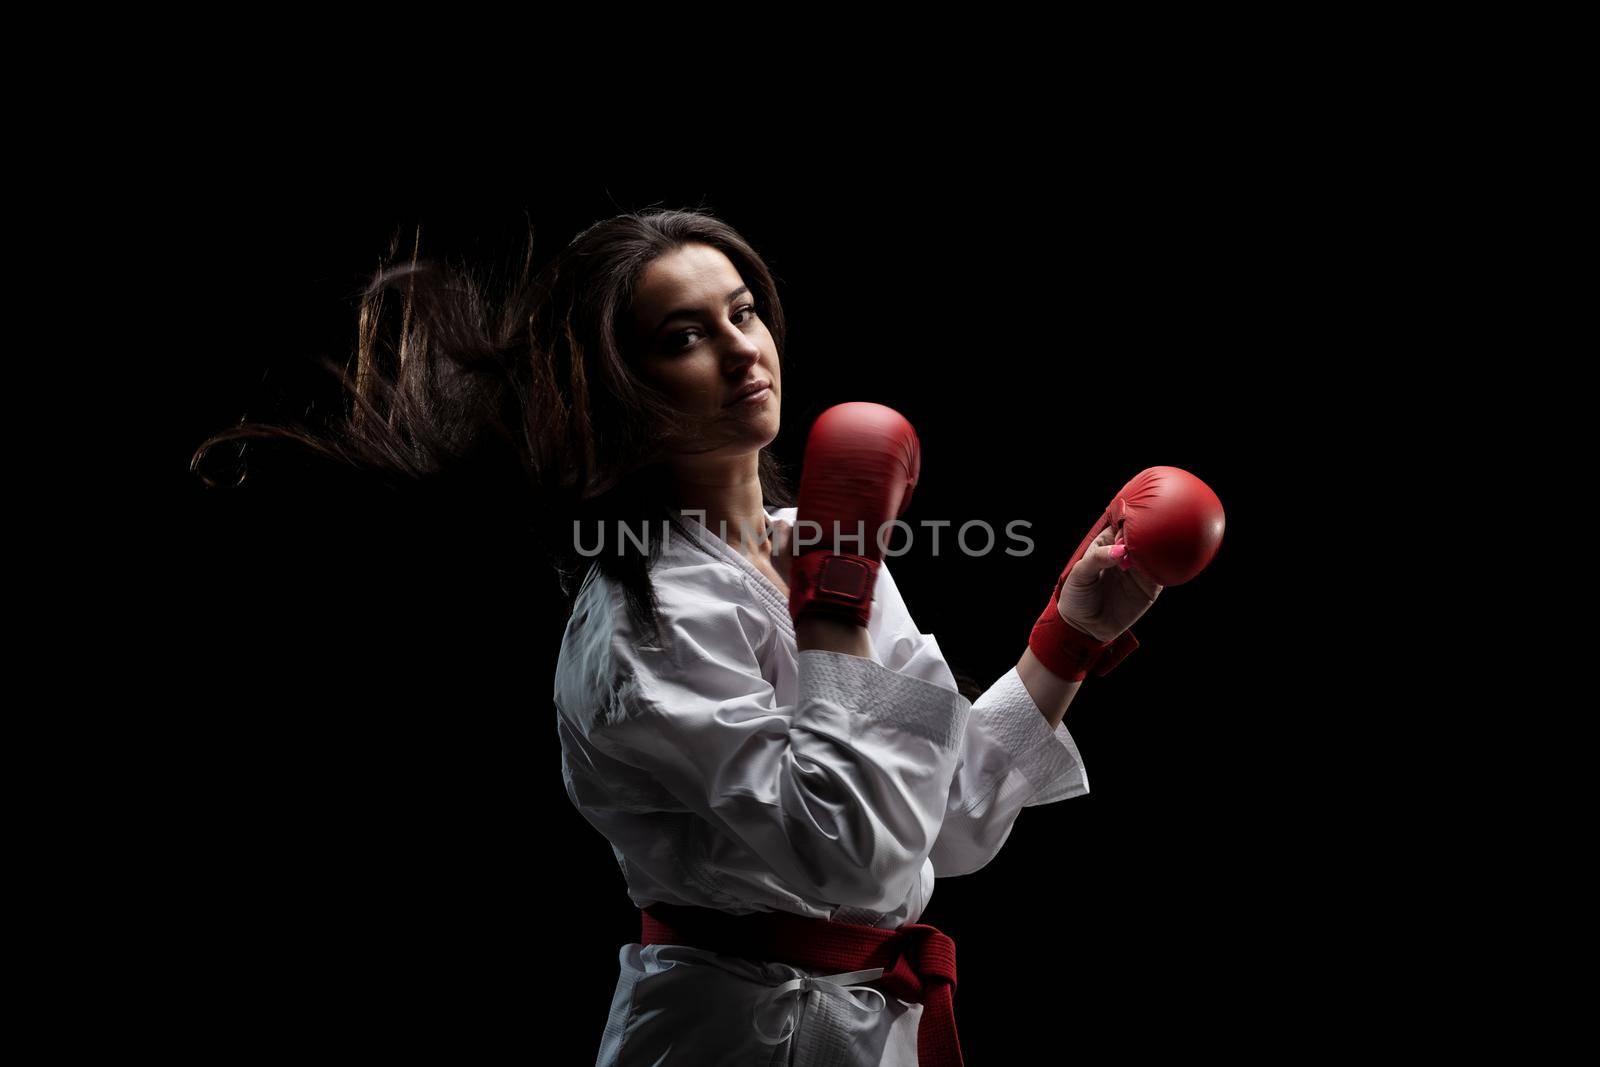 karate girl posing in kimono and red gloves against black background by kokimk